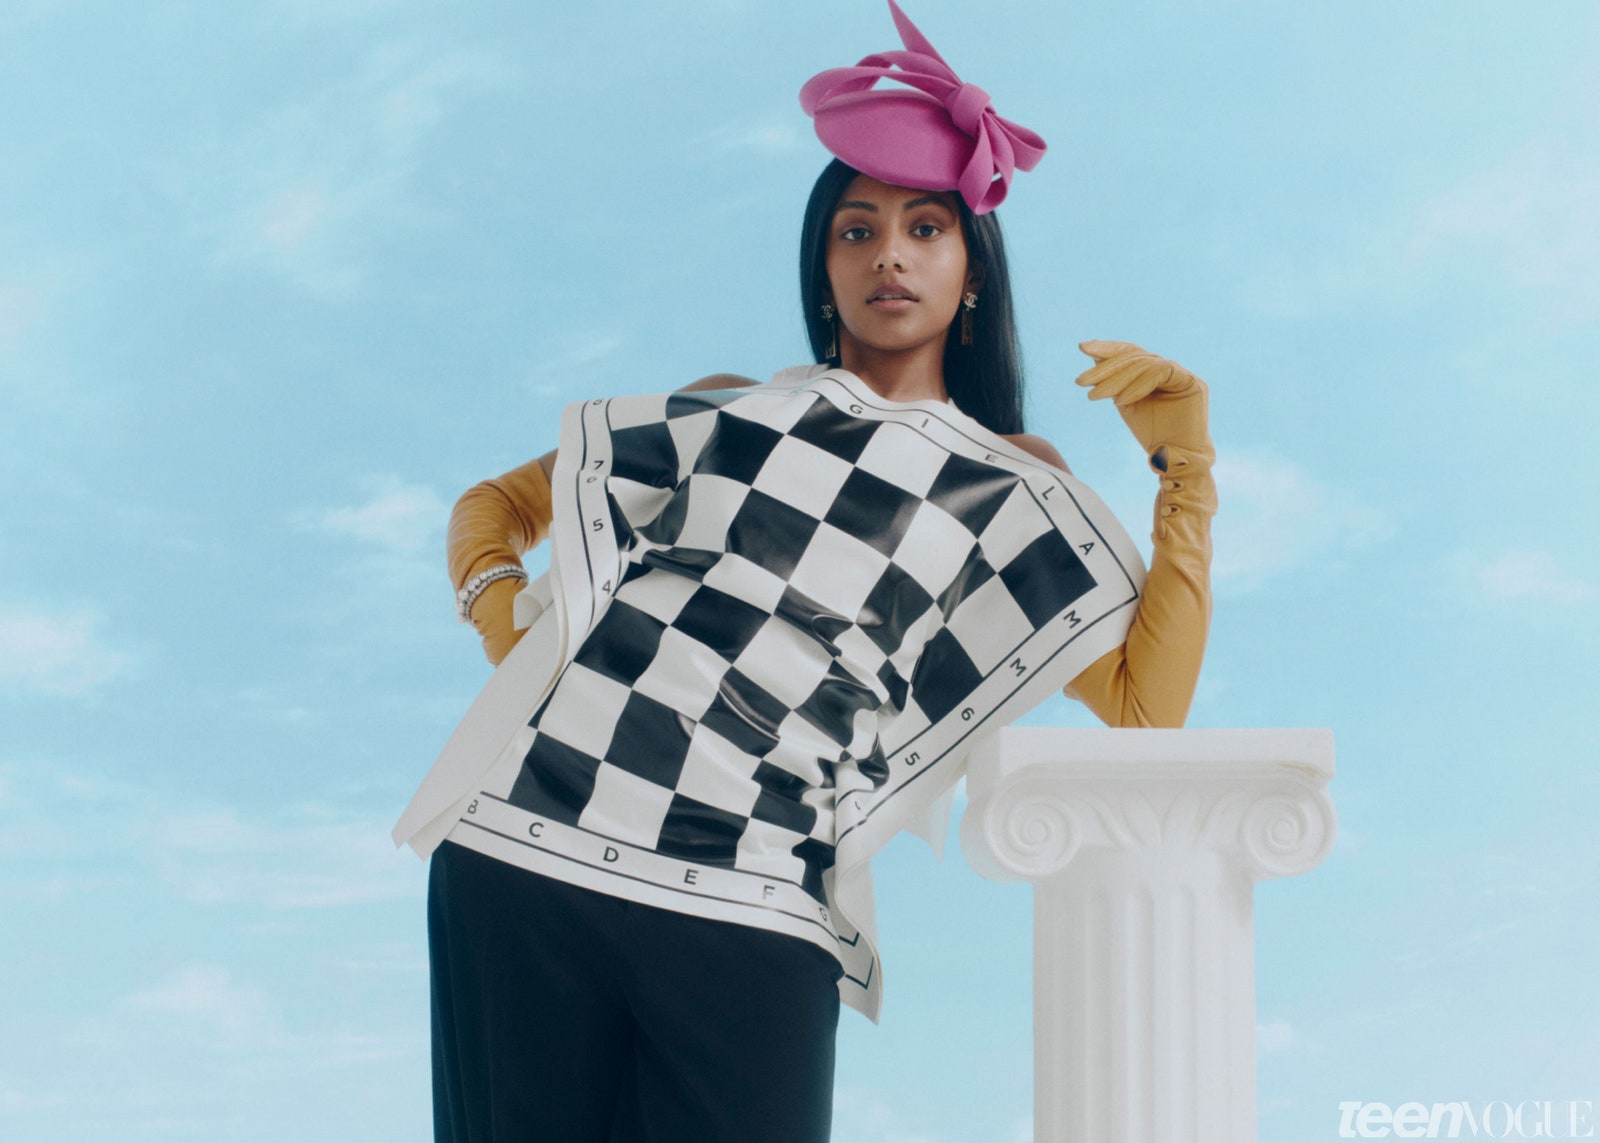 Charithra Chandran wearing a top that looks like a chess board yellow gloves and a pink headpiece. She's leaning on a...